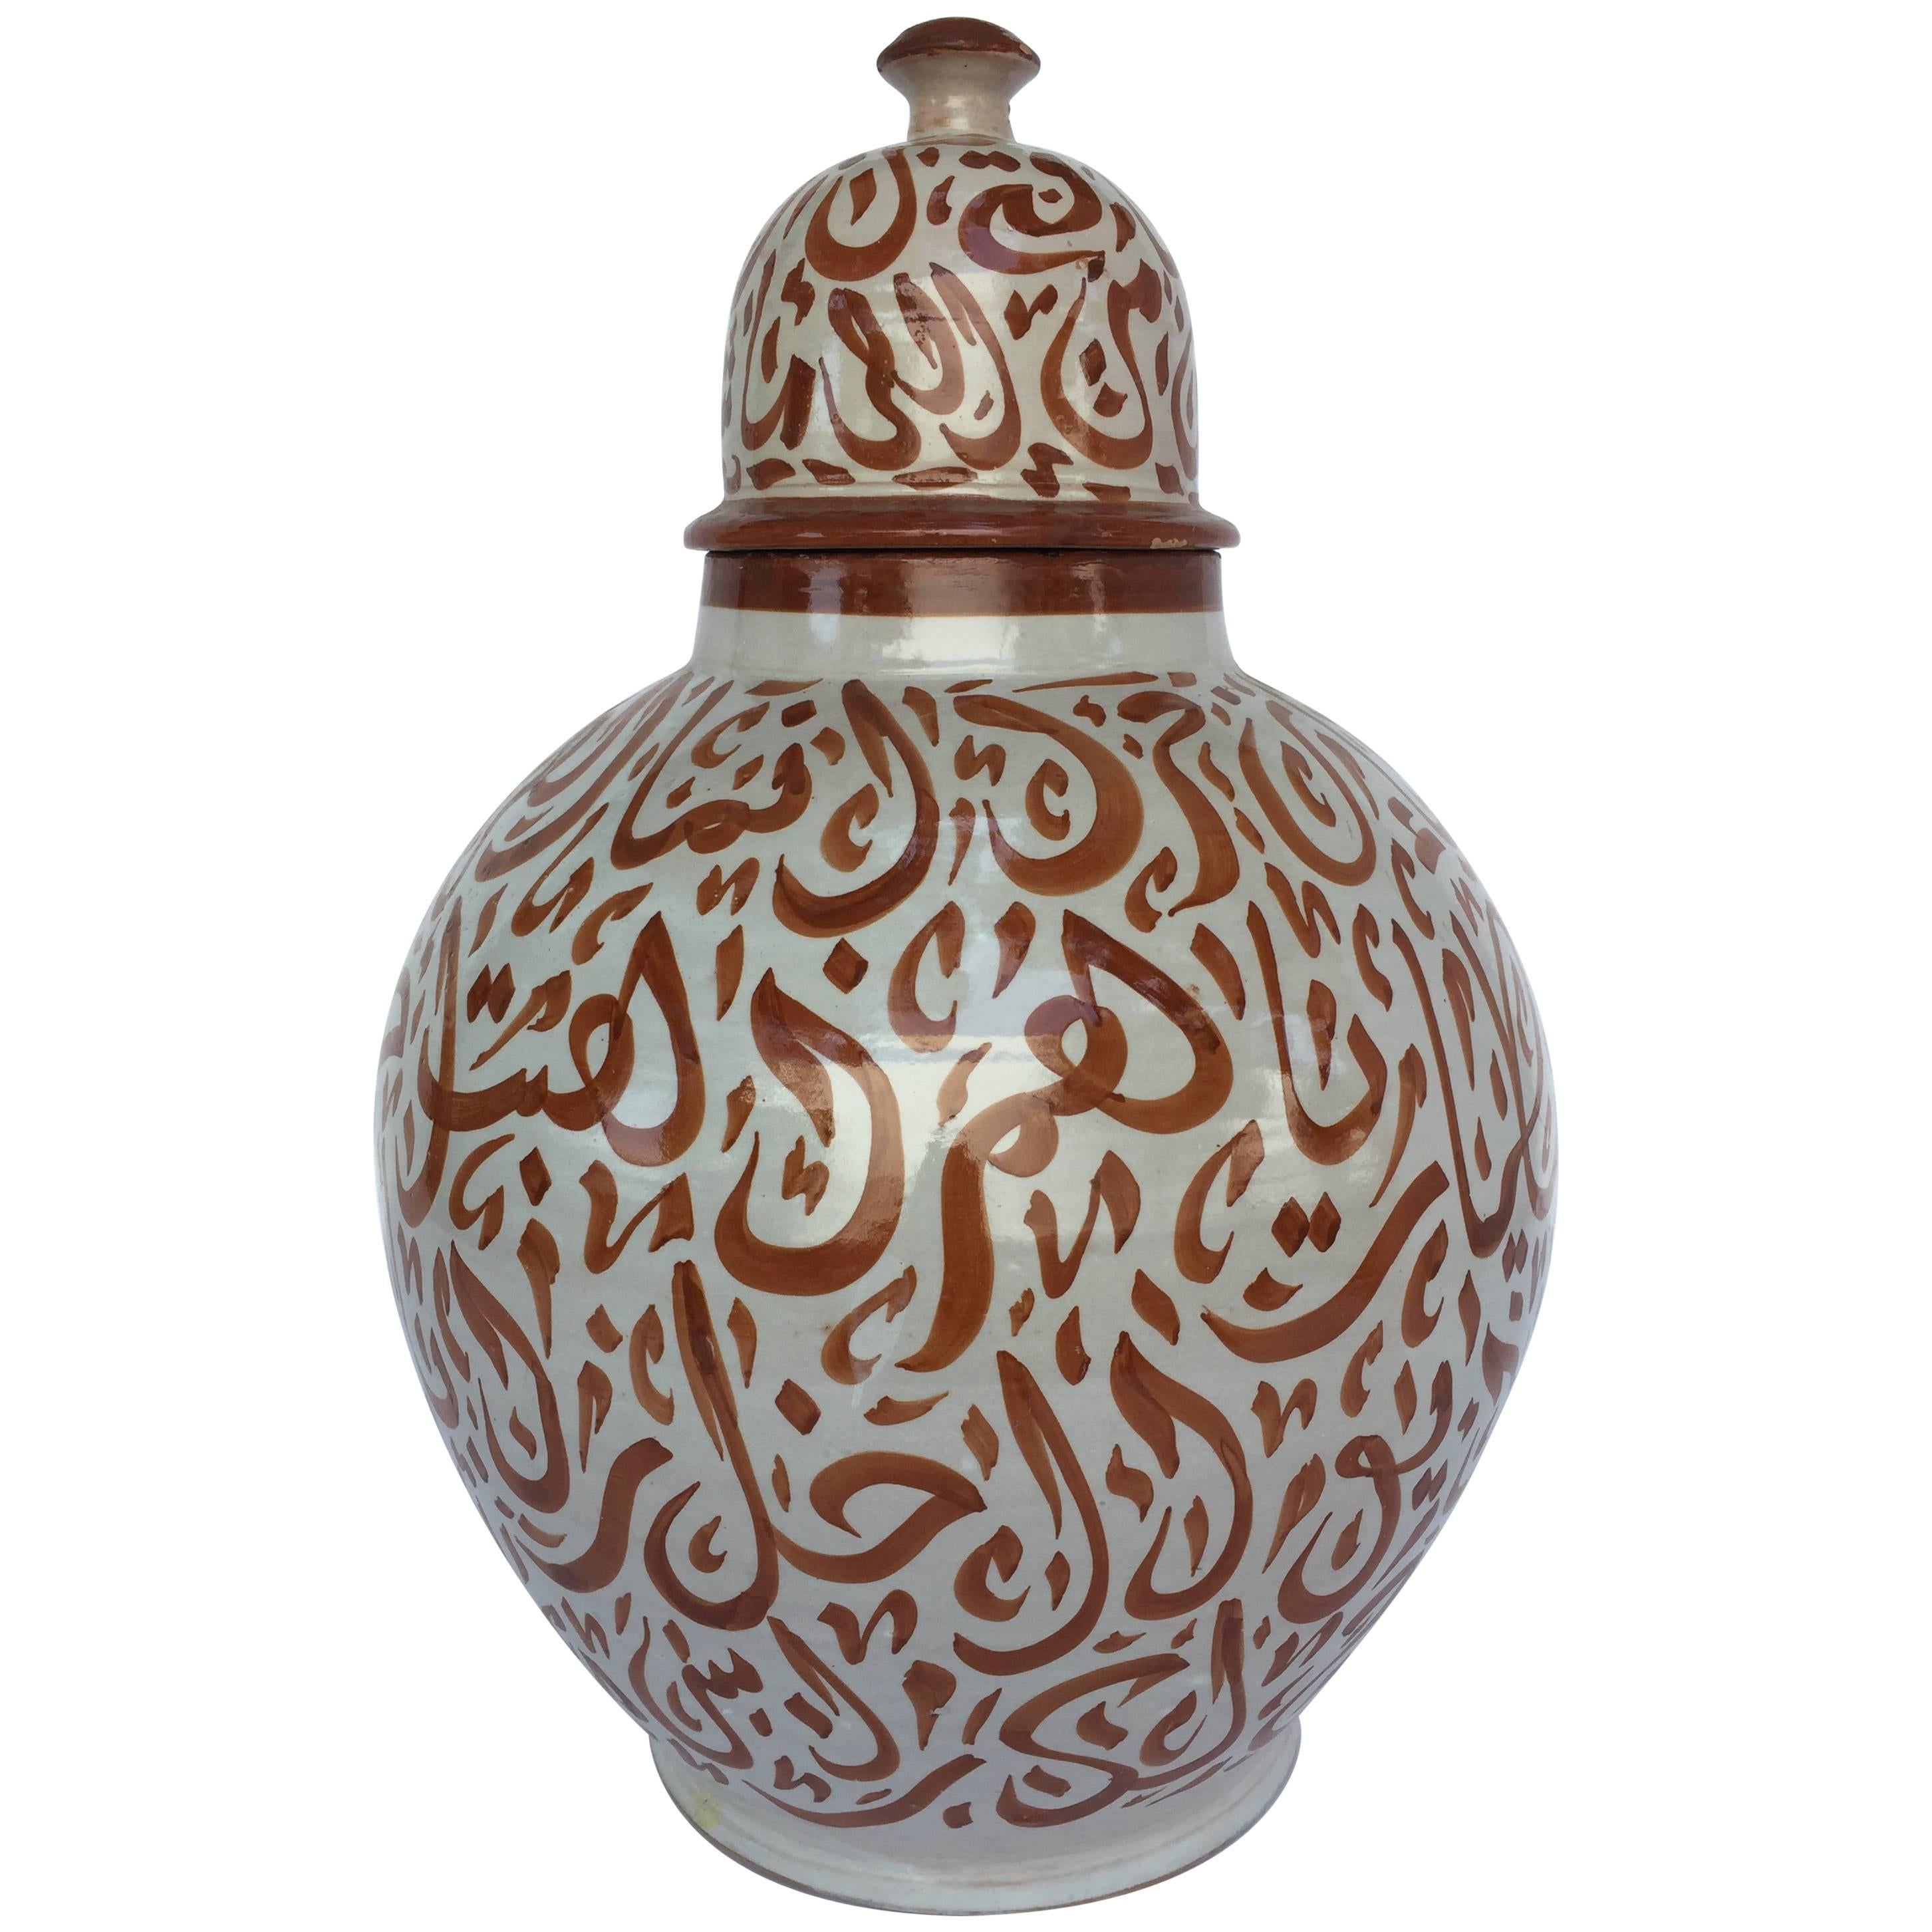 Moroccan Ceramic Lidded Urn from Fez with Arabic Calligraphy Writing For Sale